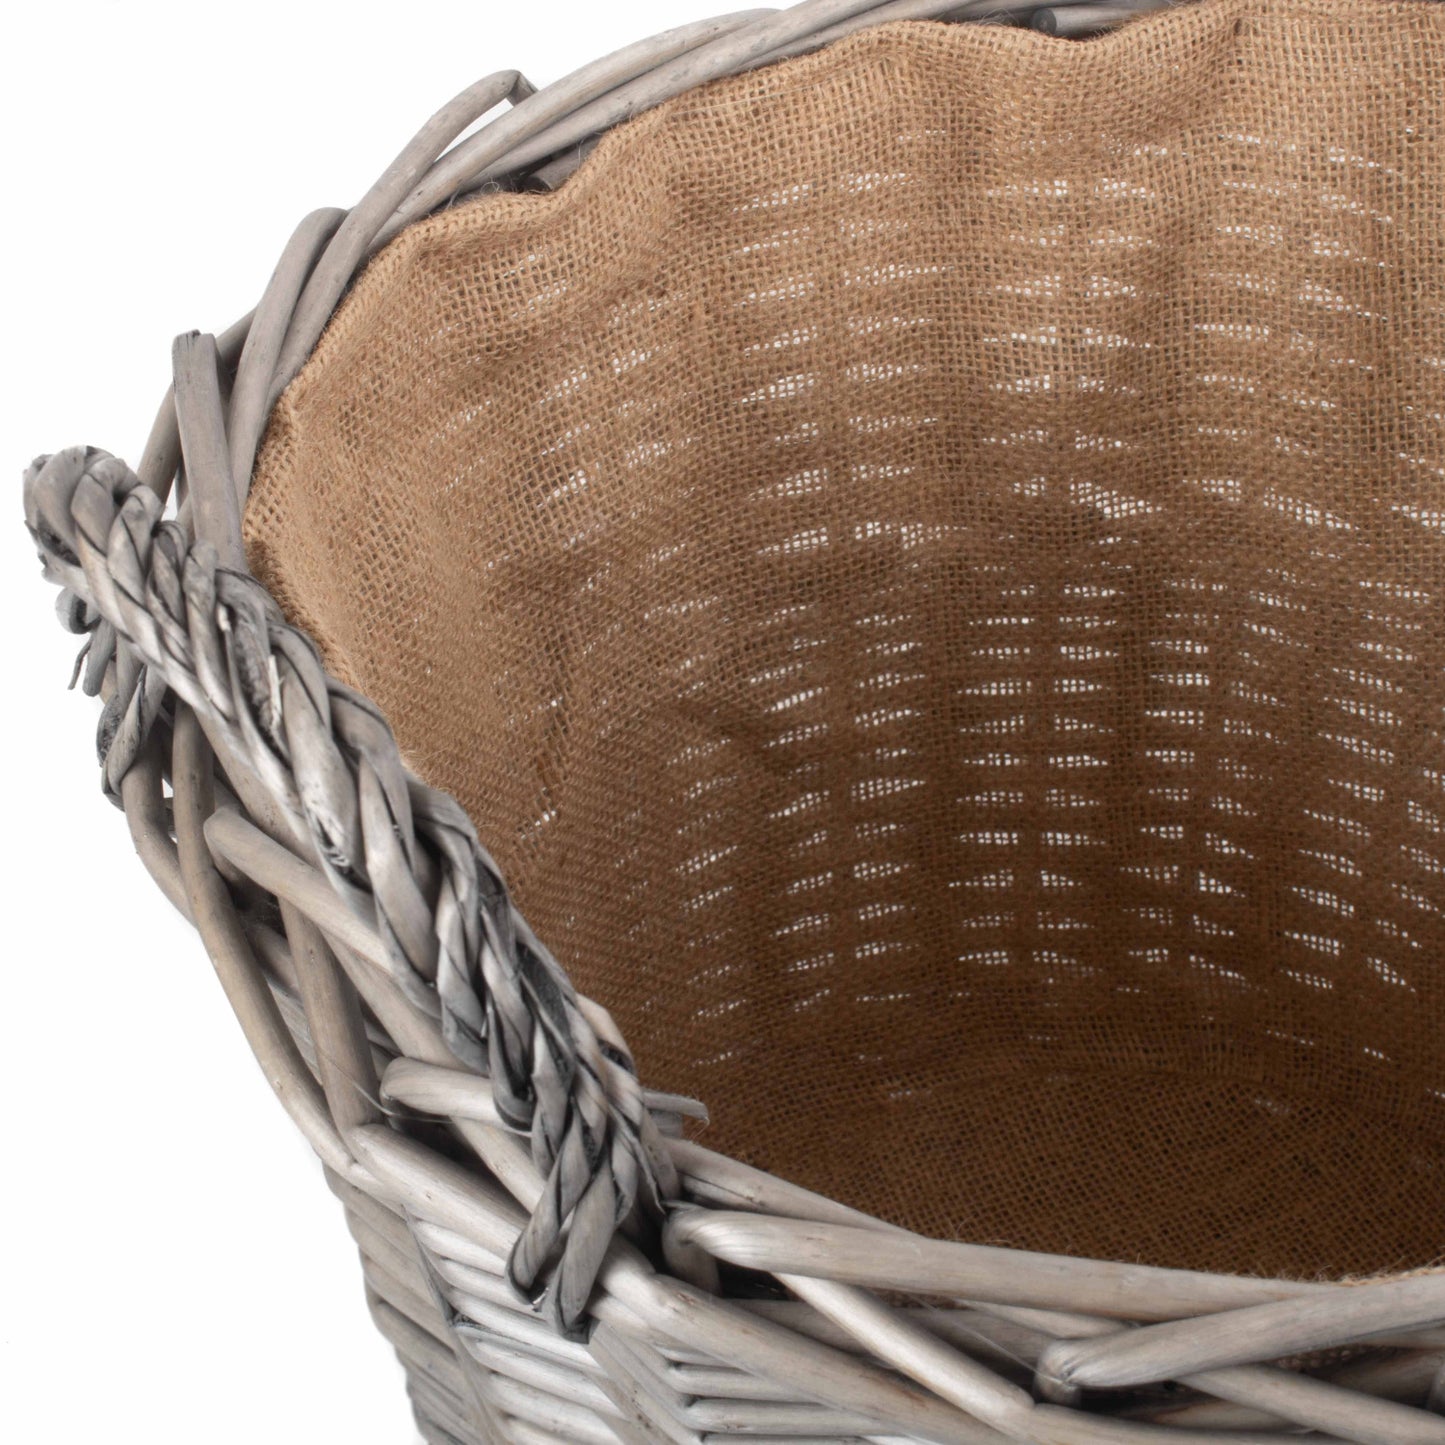 Large Round Lined Wicker Log Basket